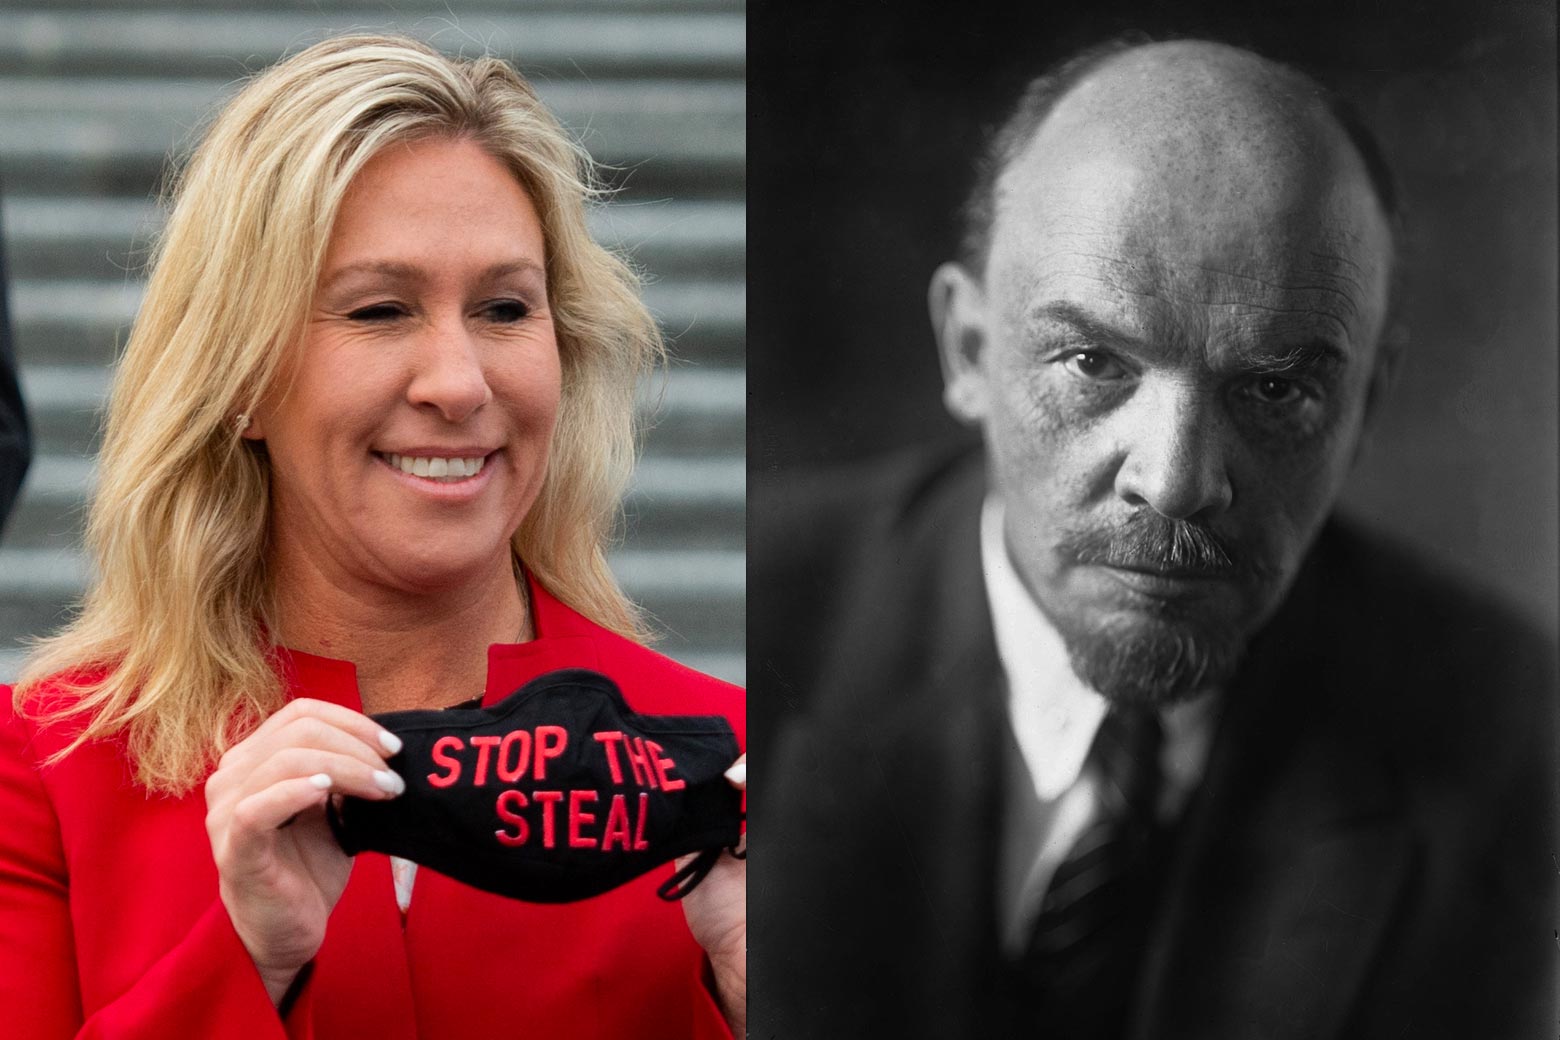 Side-by-side photos of Marjorie Taylor Greene holding up a "Stop the Steal" mask and Vladimir Lenin.